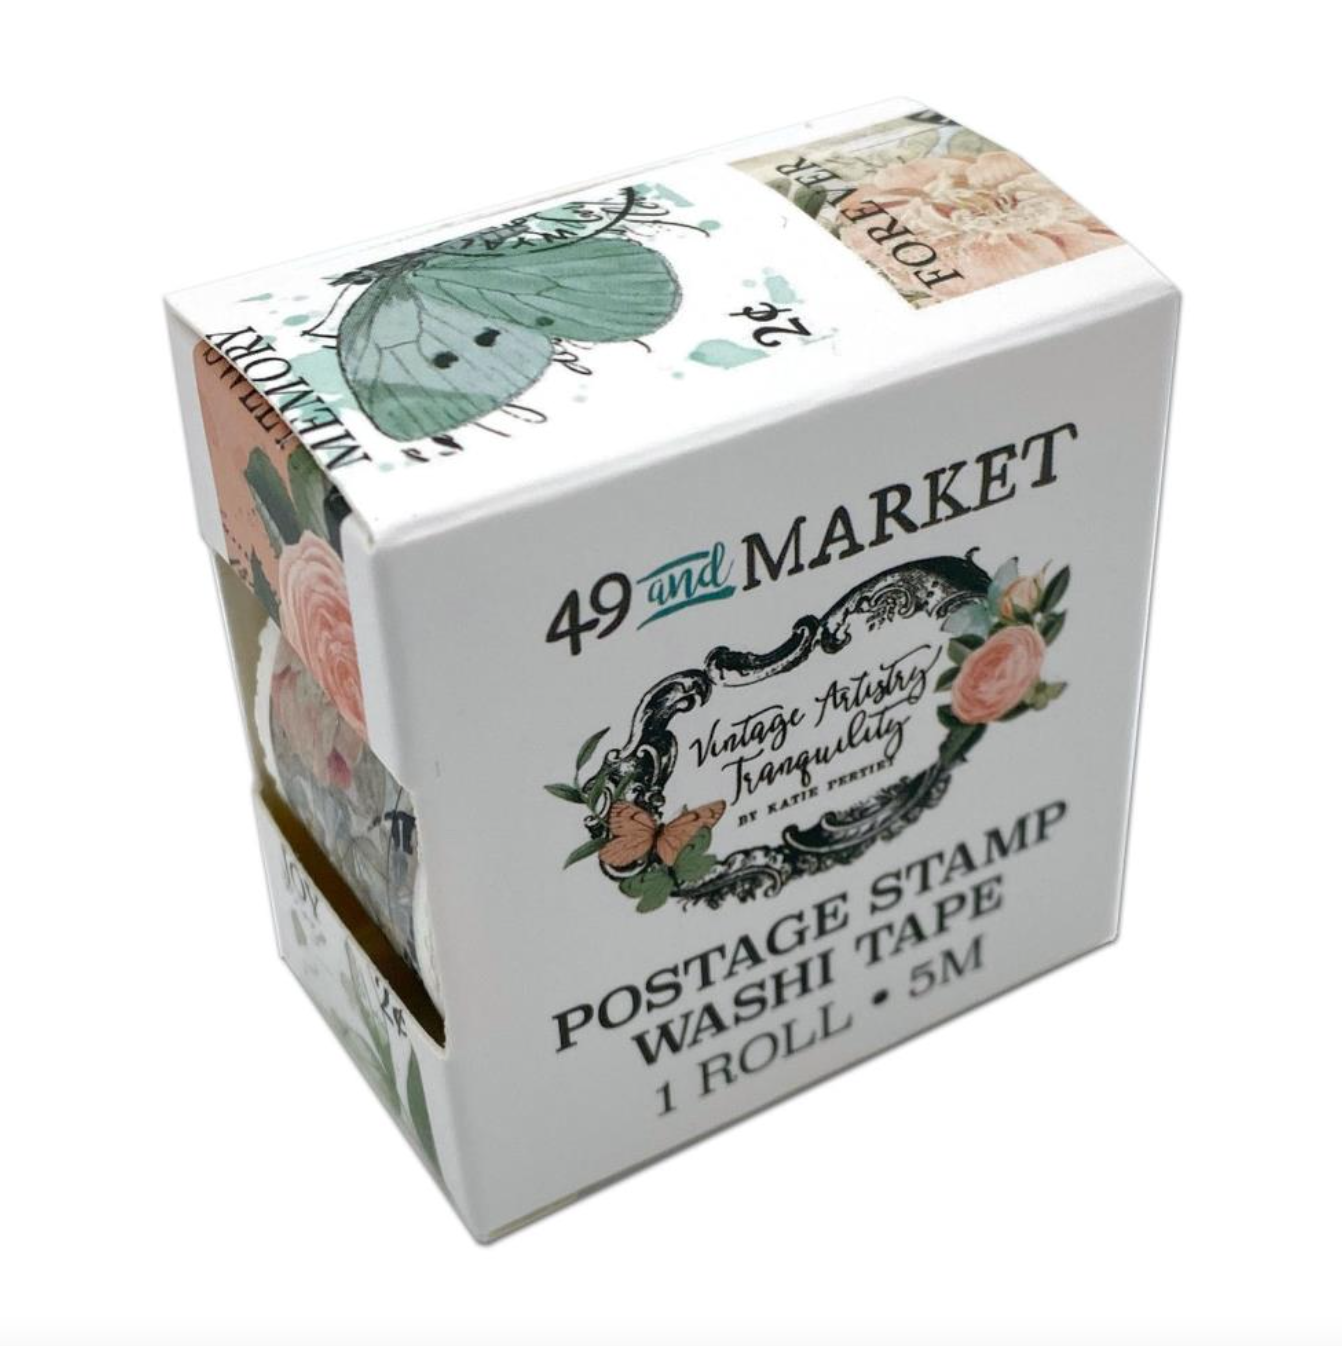 Washi Tape Roll - Postage Stamp - Vintage Artistry Tranquility - 49 And Market